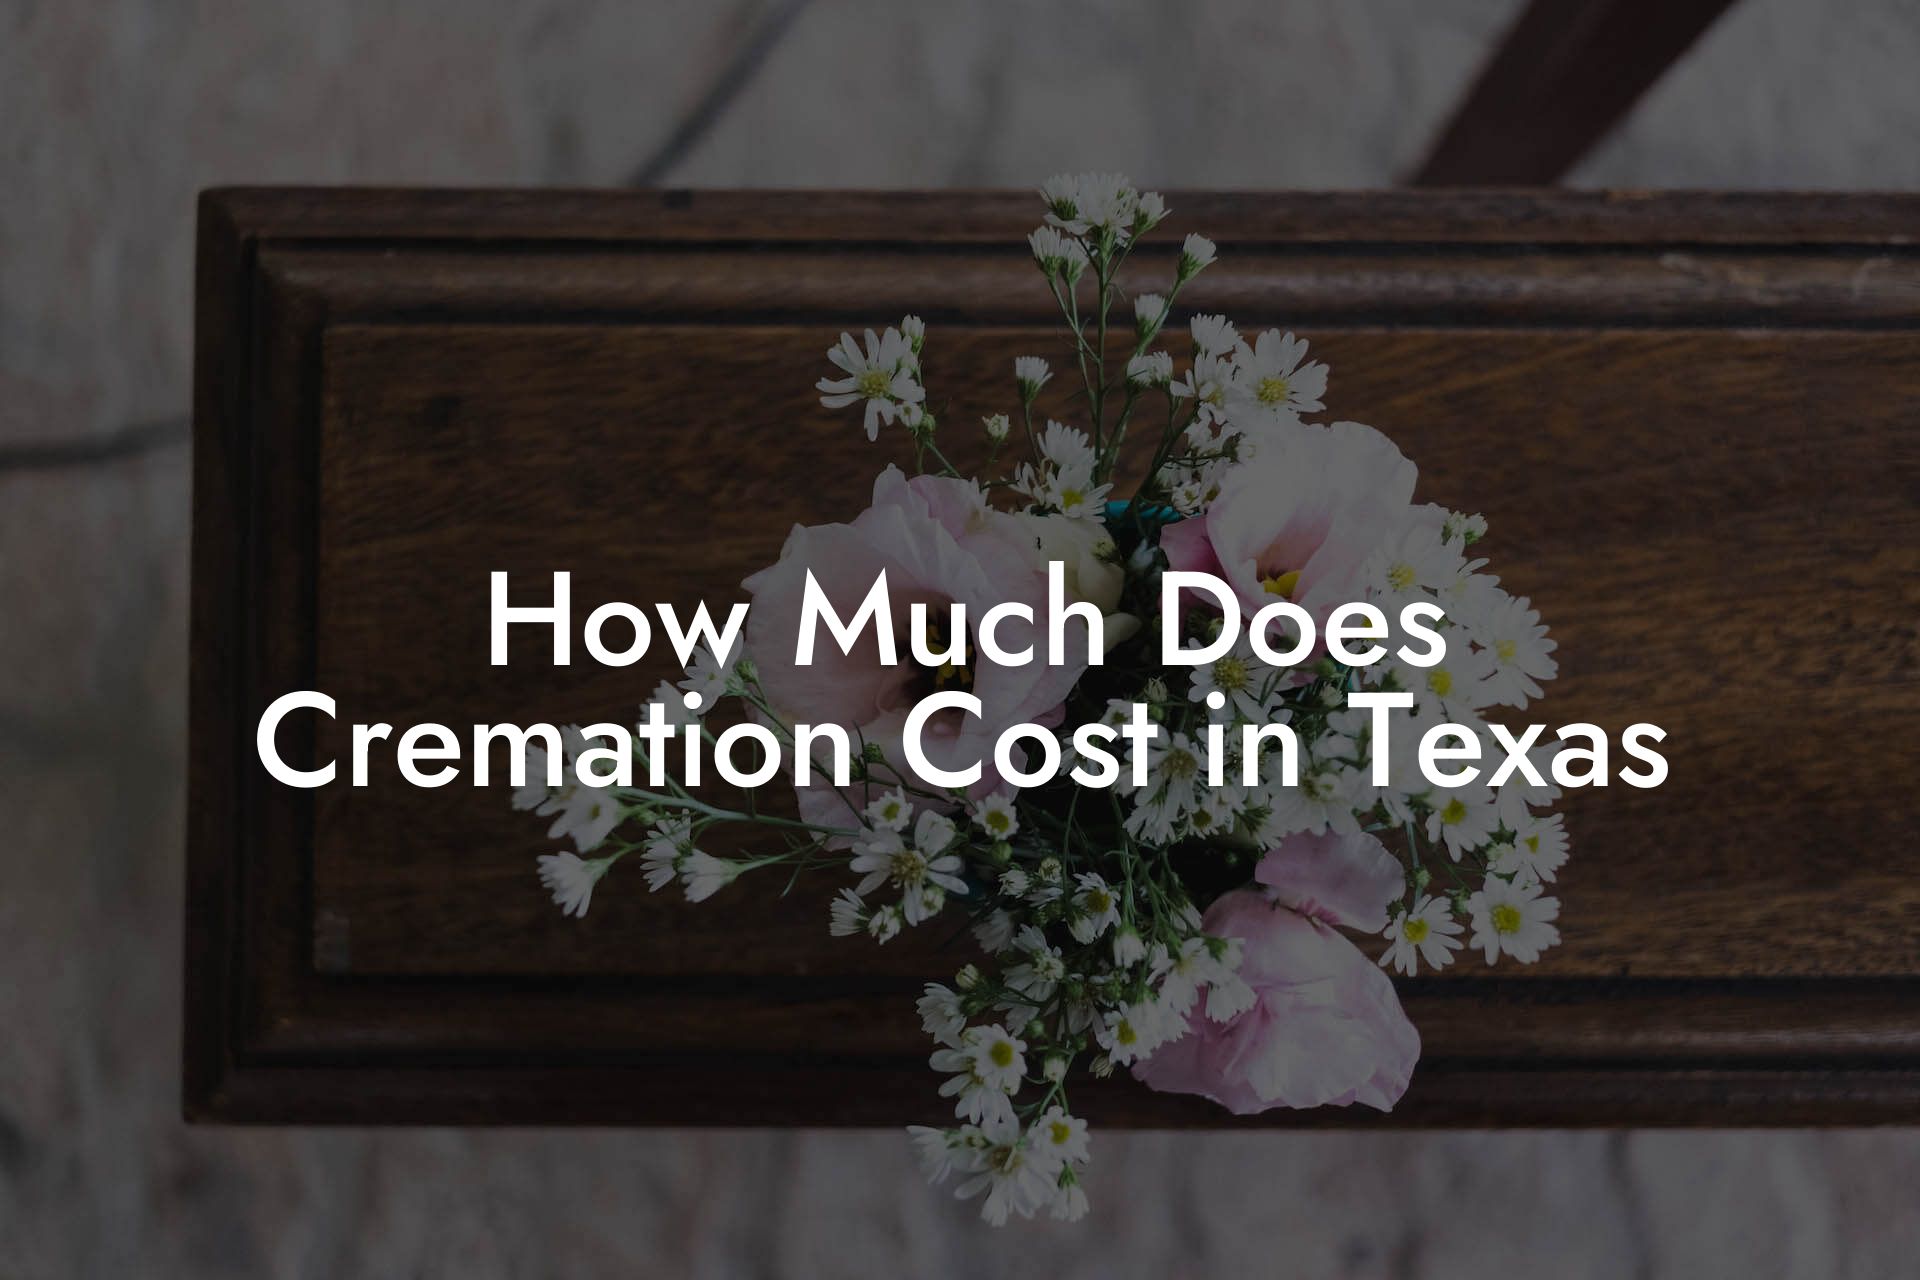 How Much Does Cremation Cost in Texas